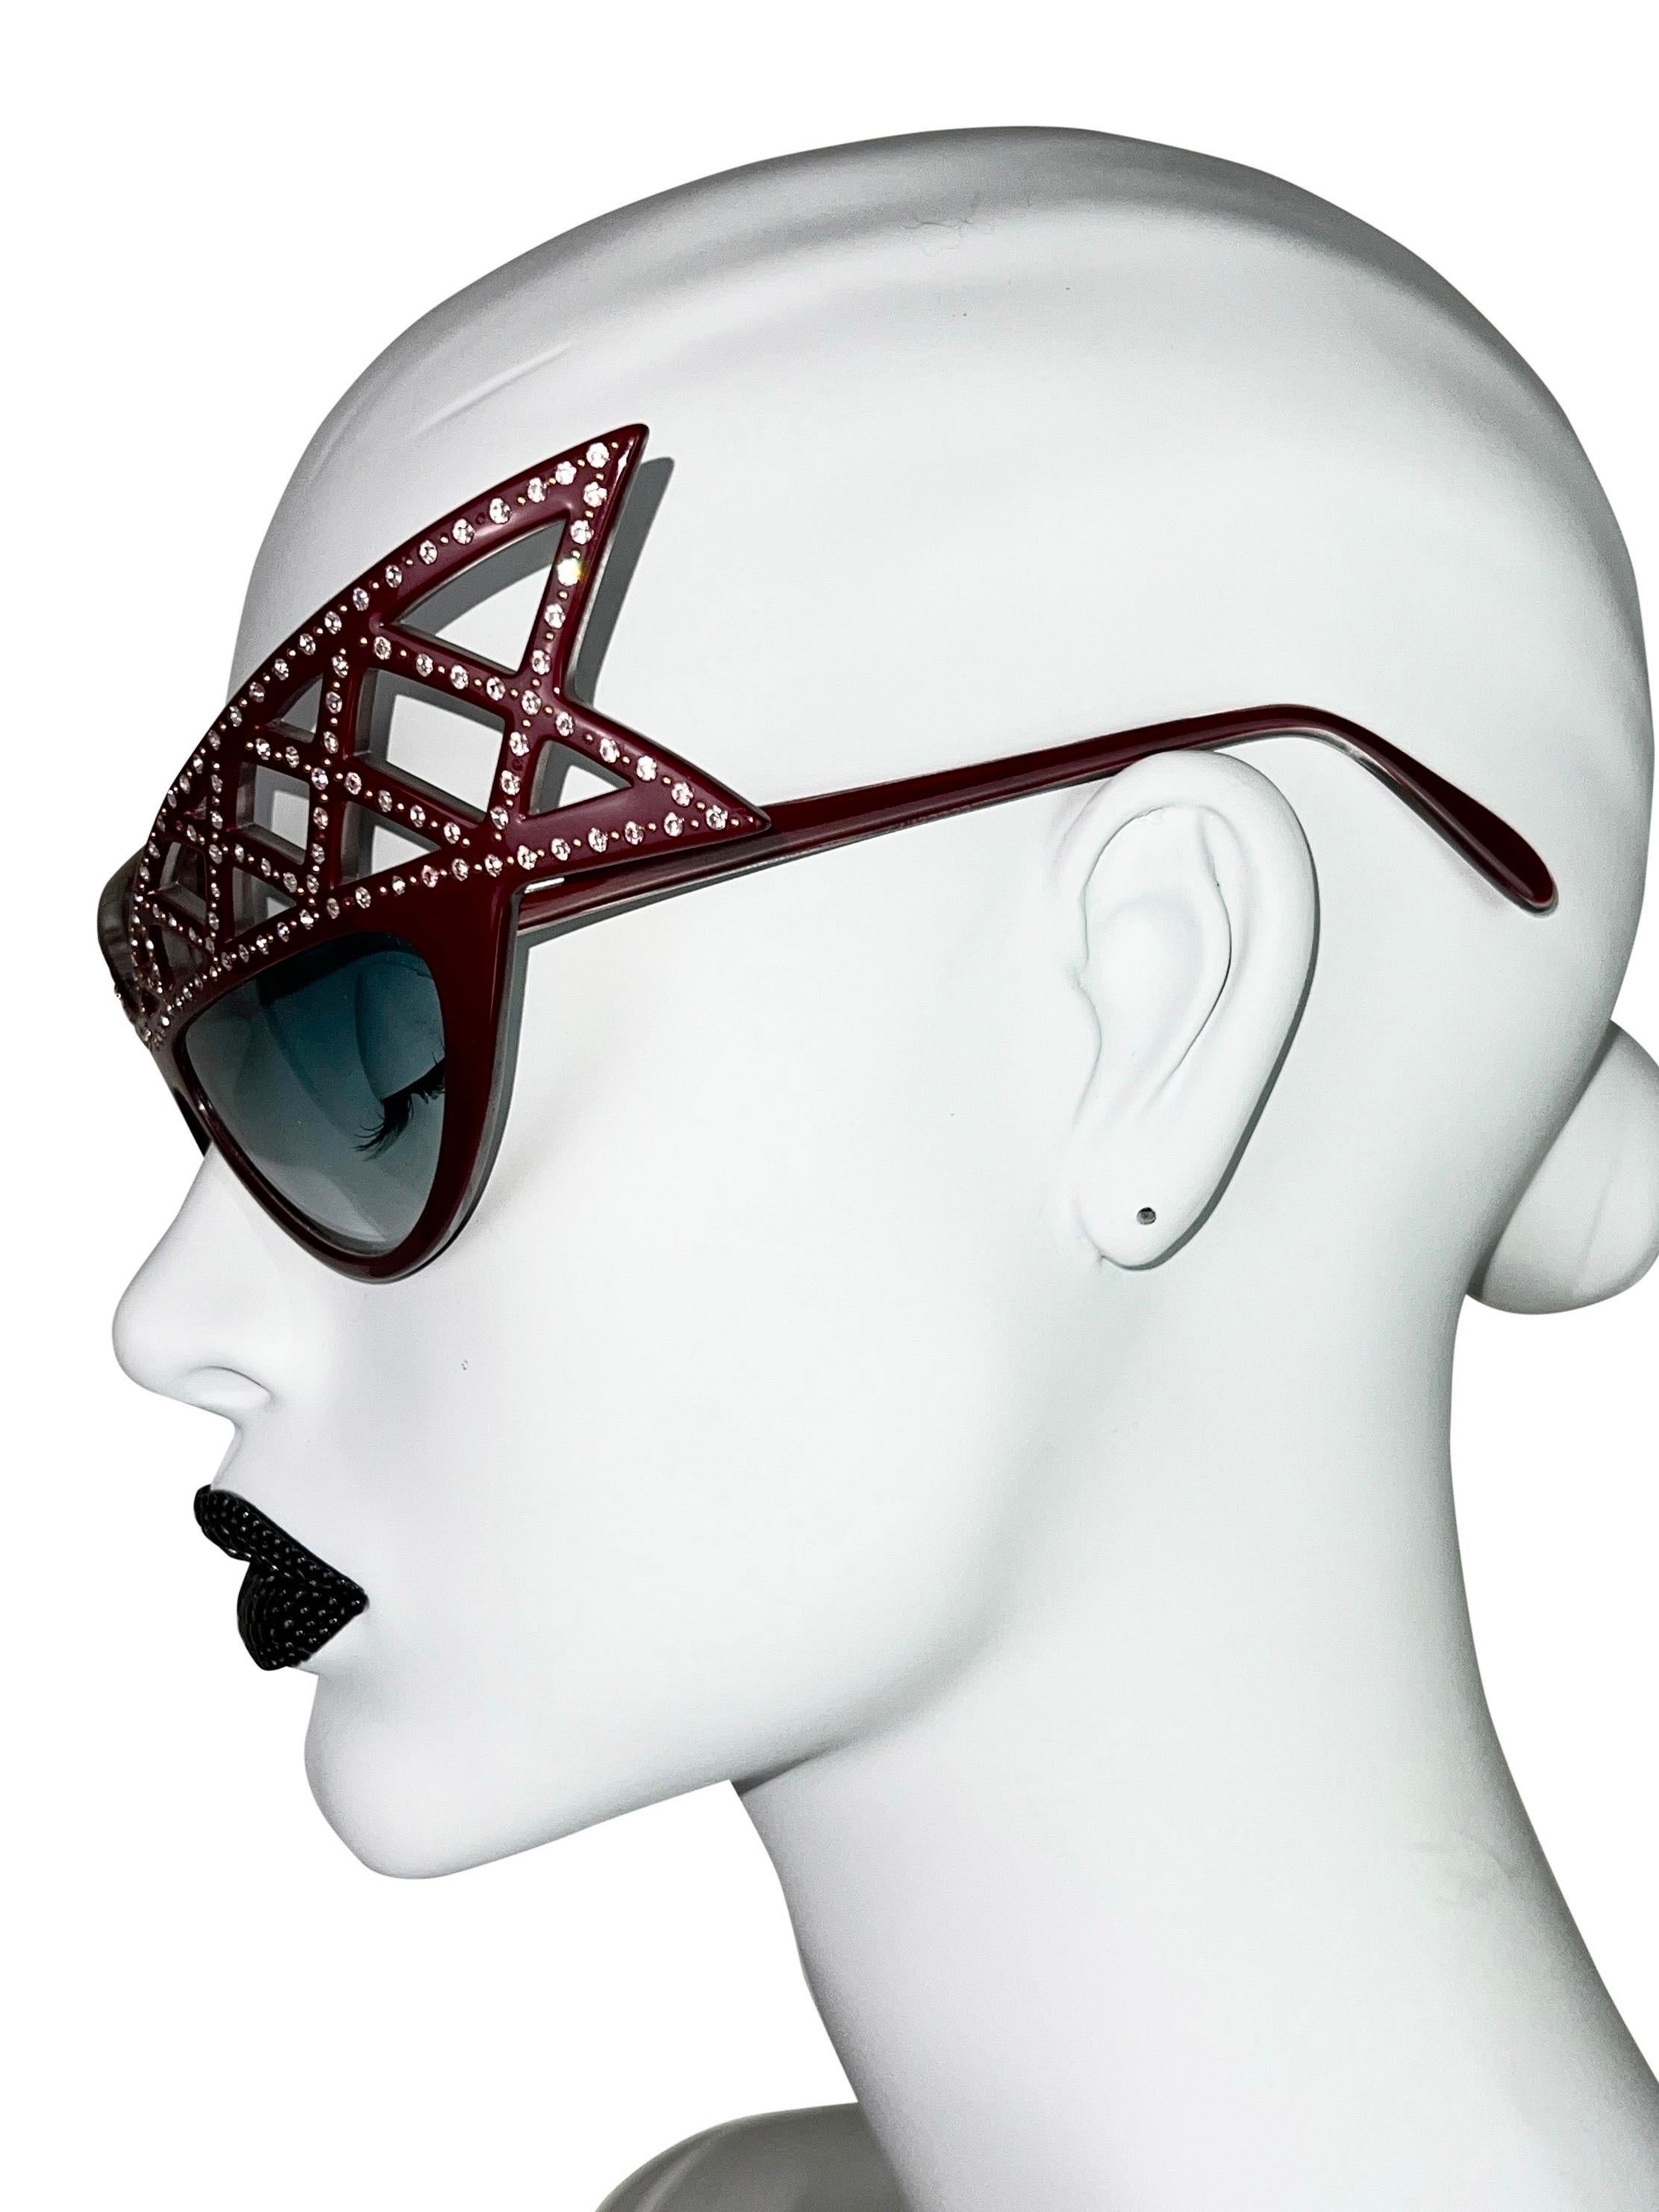 Alain Mikli 1981 Bedazzled “WINGS” Sunglasses For Sale 2